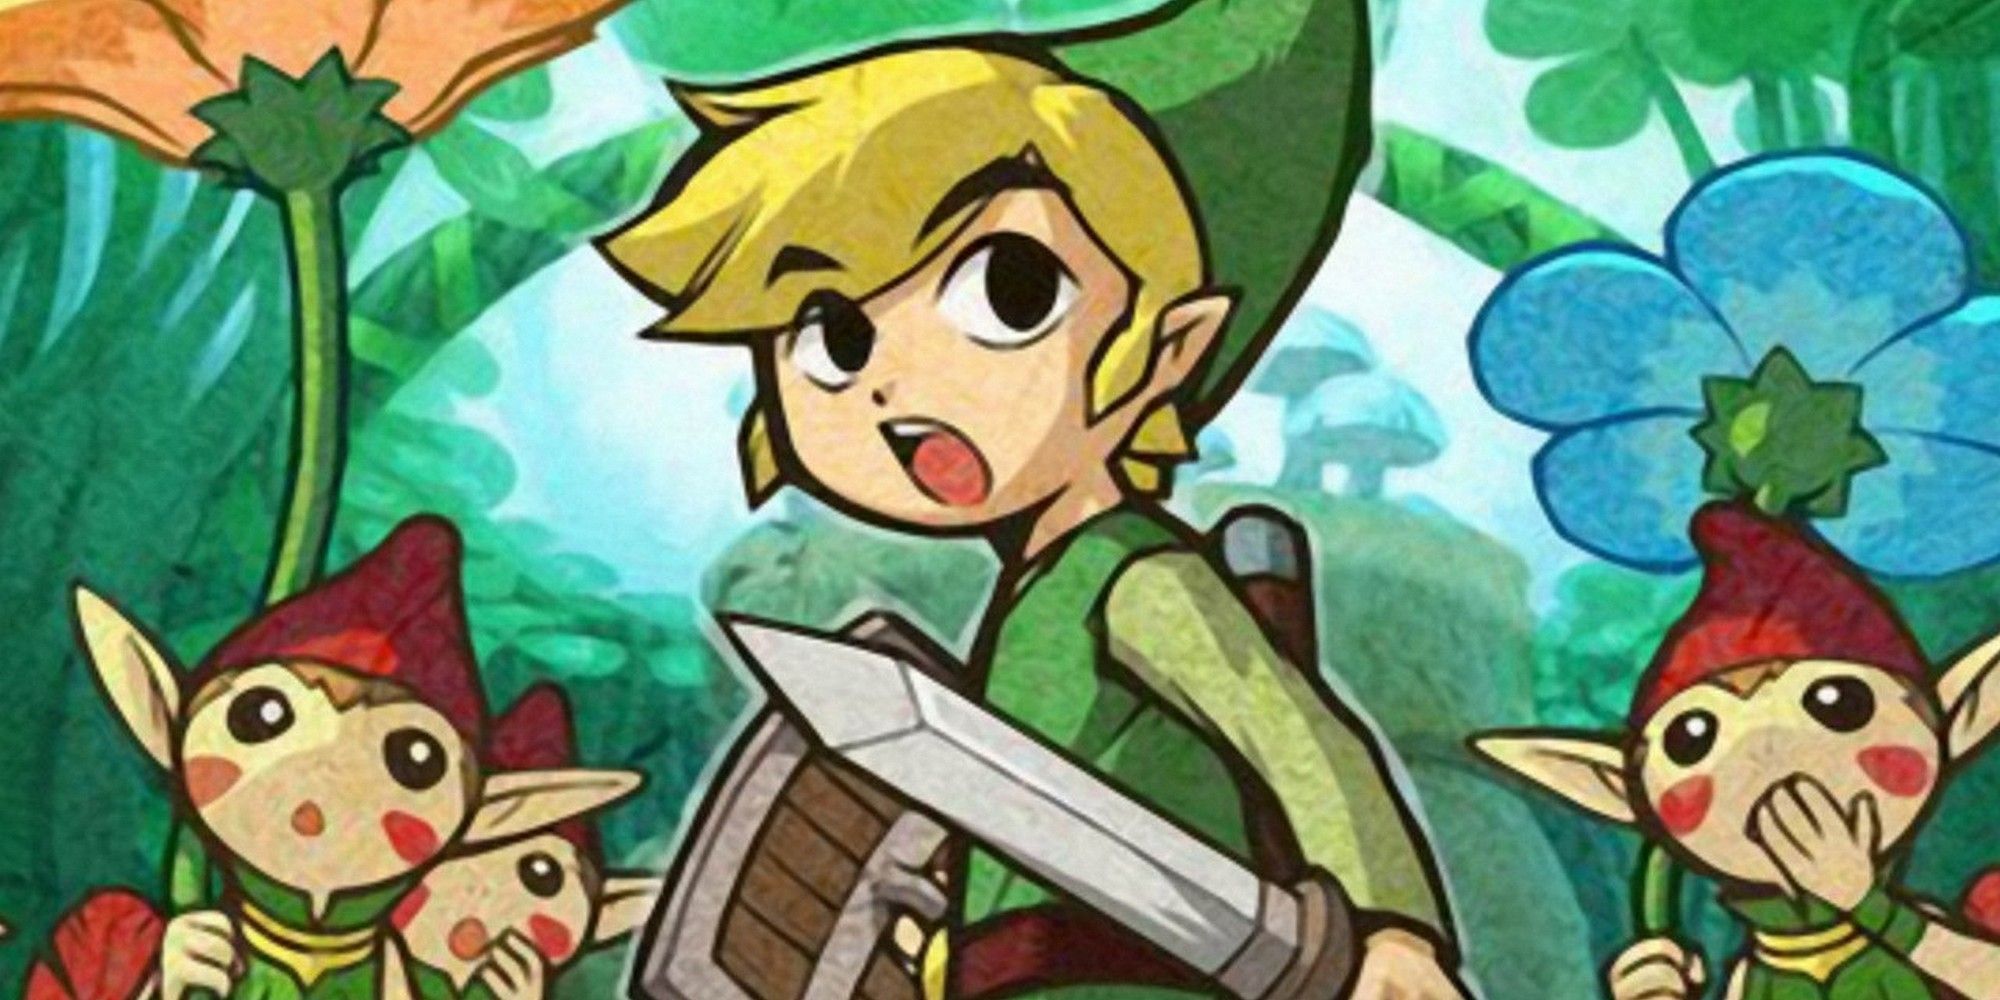 Link and Picori in The Legend of Zelda The Minish Cap